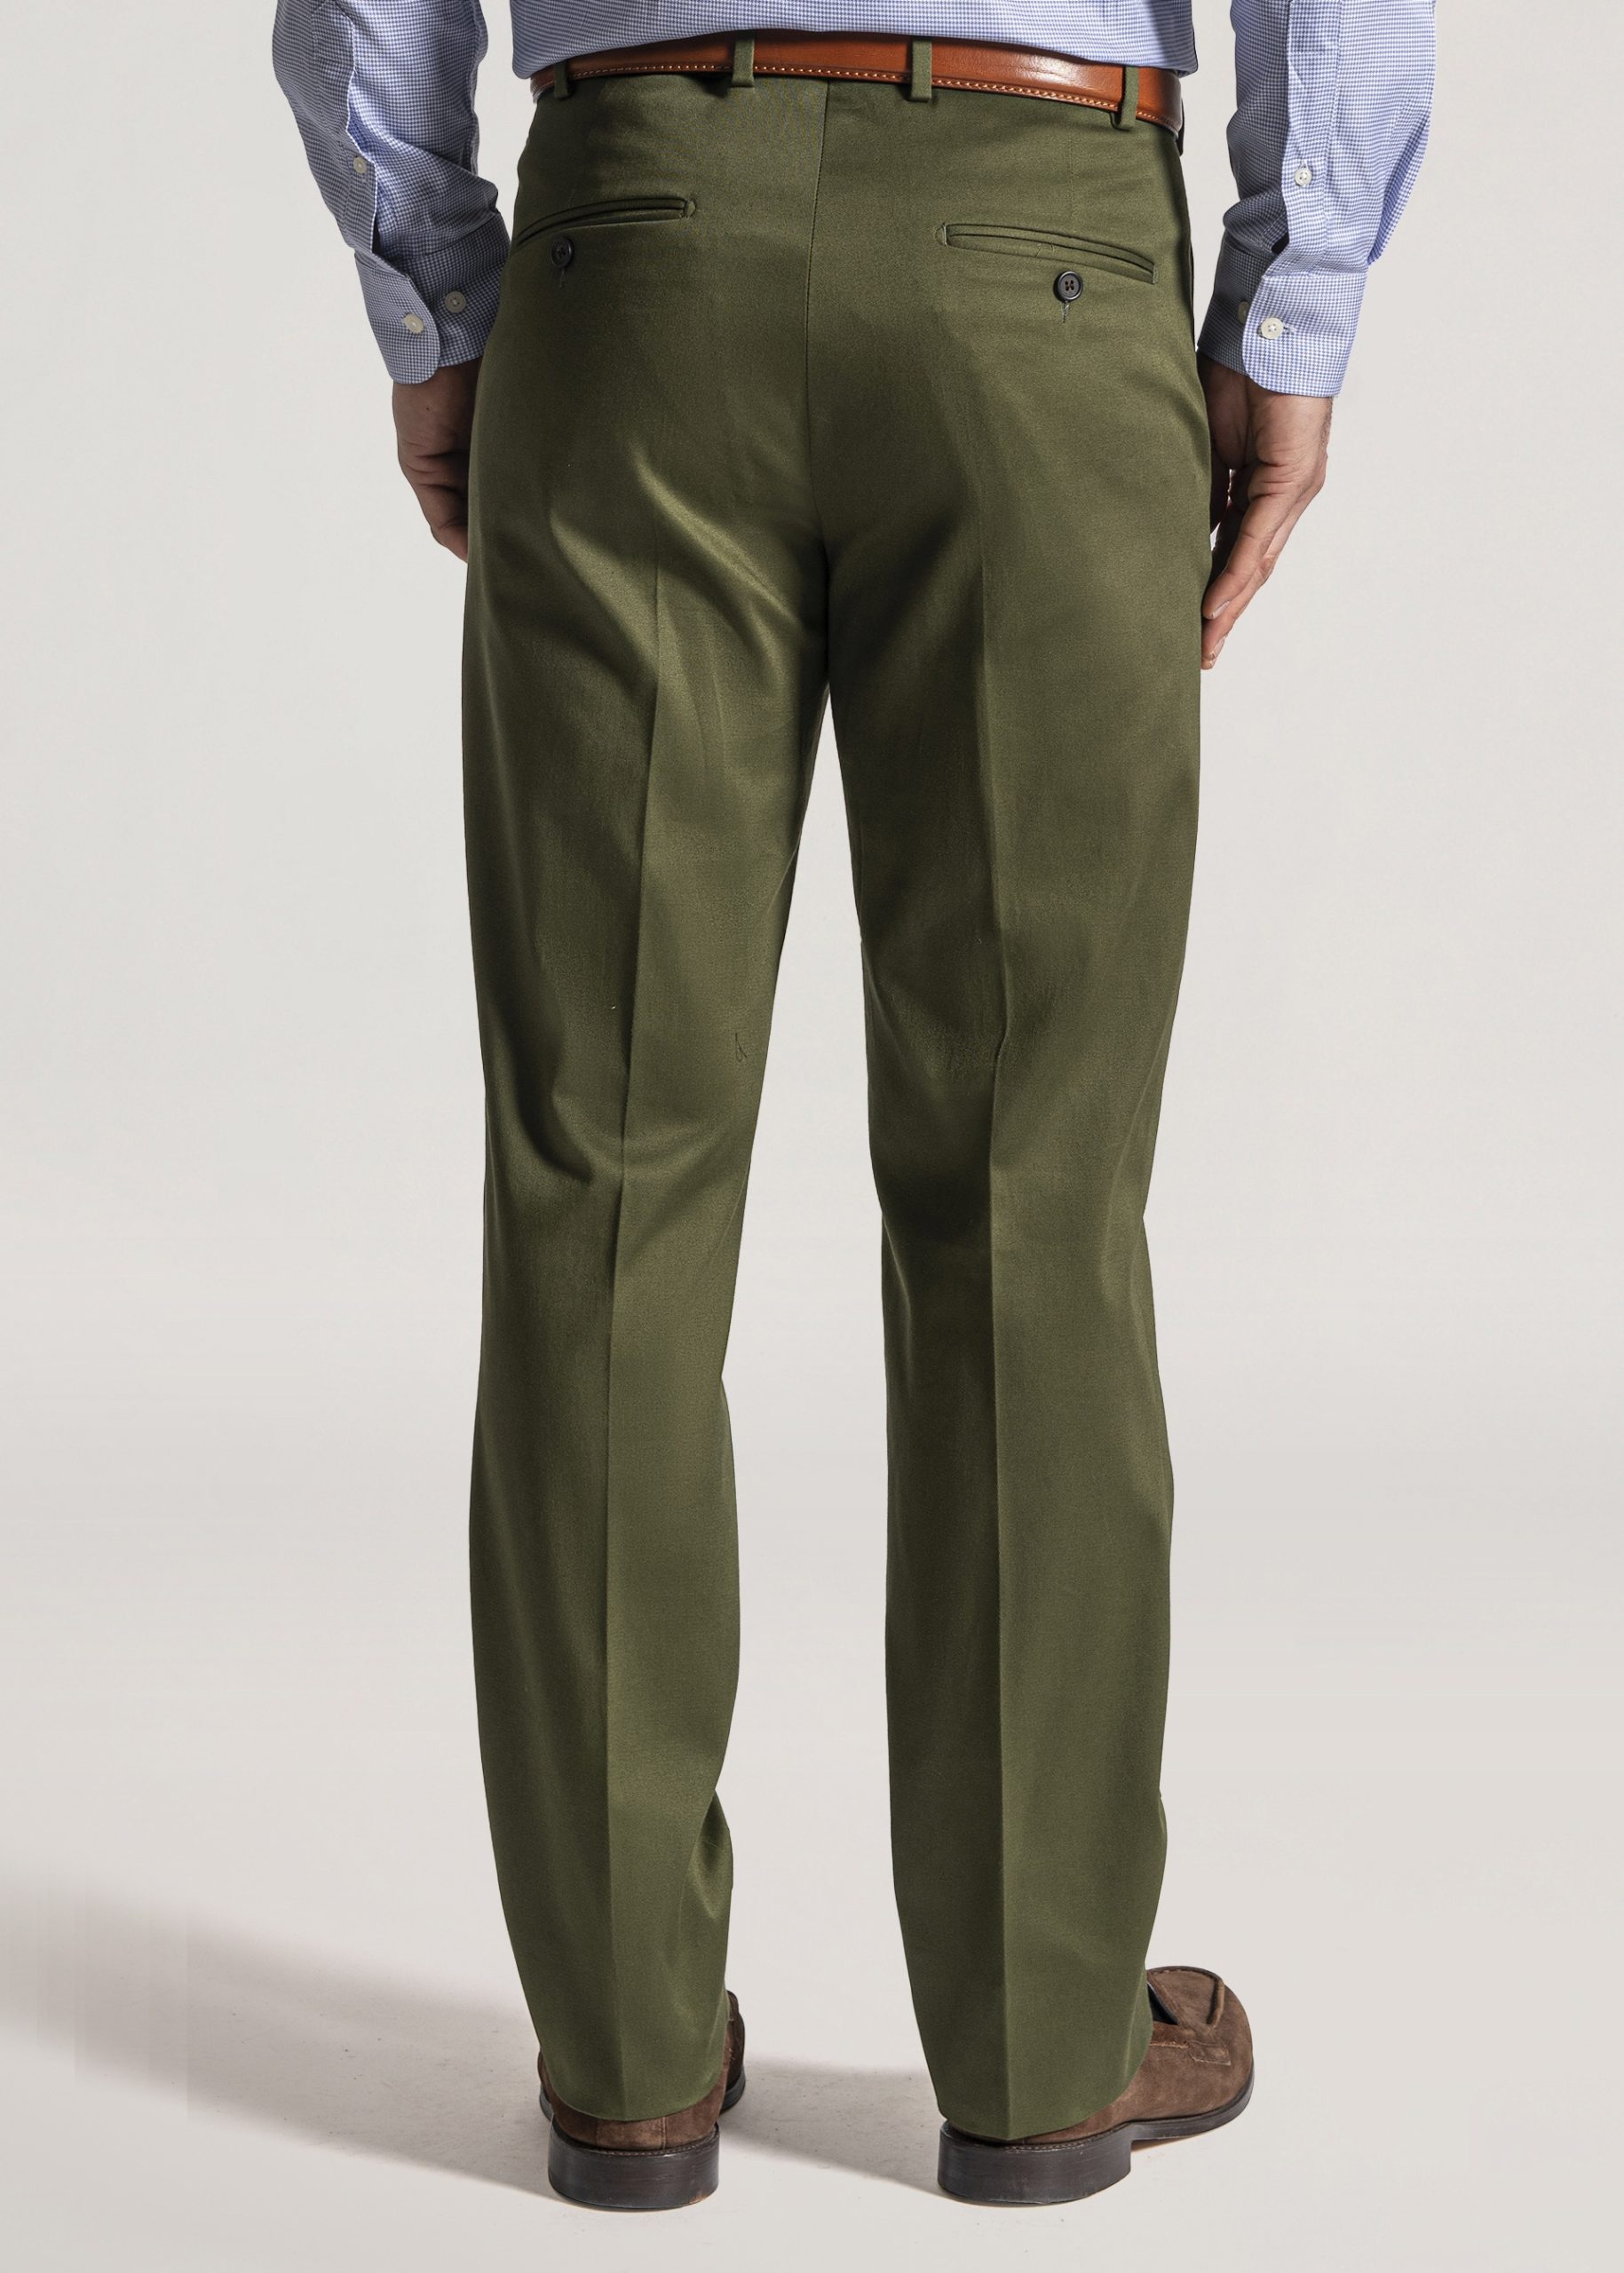 Cotton twill trousers by Roderick Charles in army green